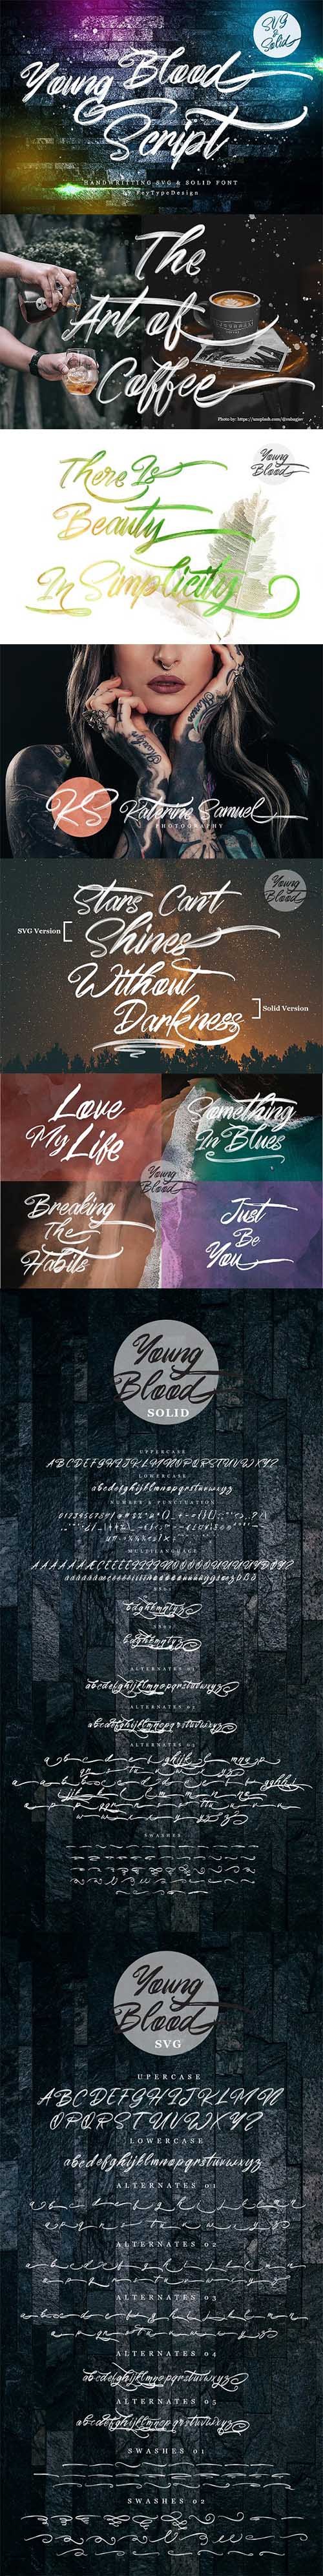 Young Blood SVG and Solid Script 2998765